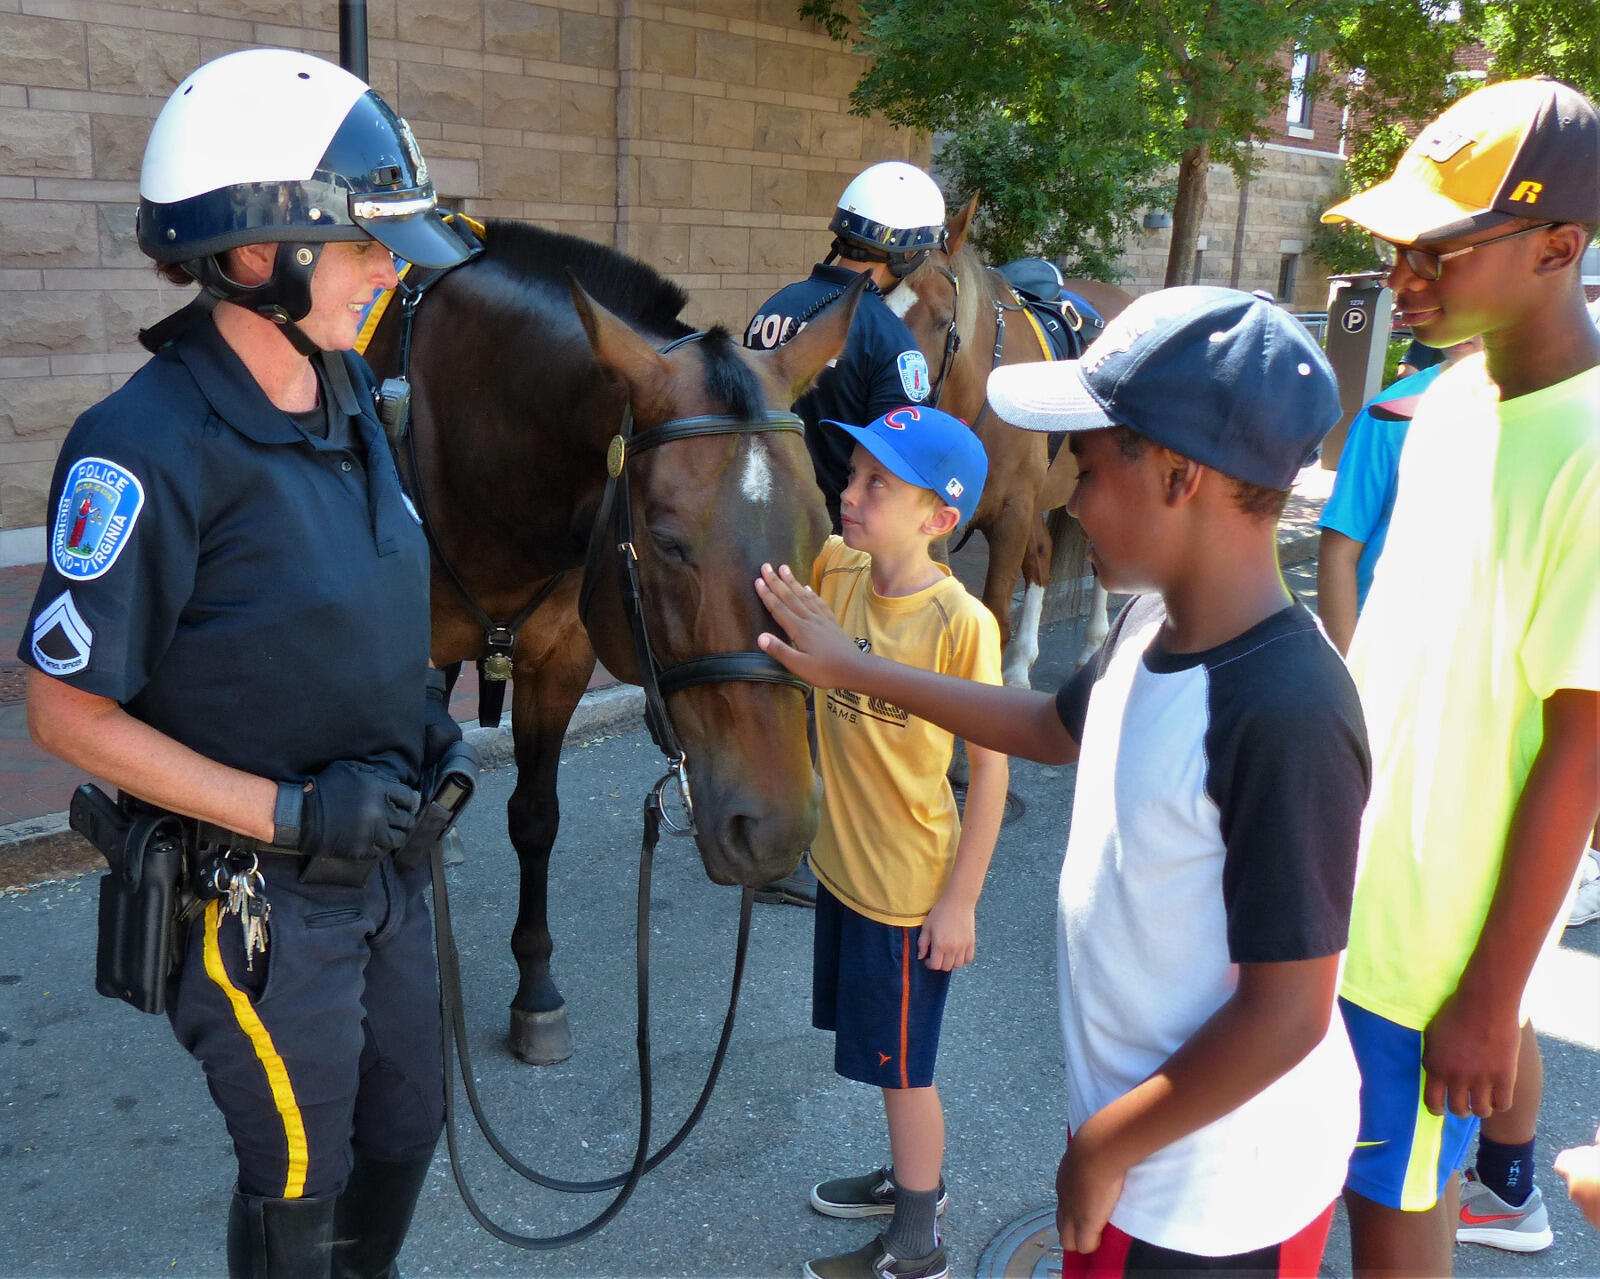 Richmond Police introduced multiple mounted units to campers and counselors from the Mary and Frances Youth Center and the Police Athletic League.